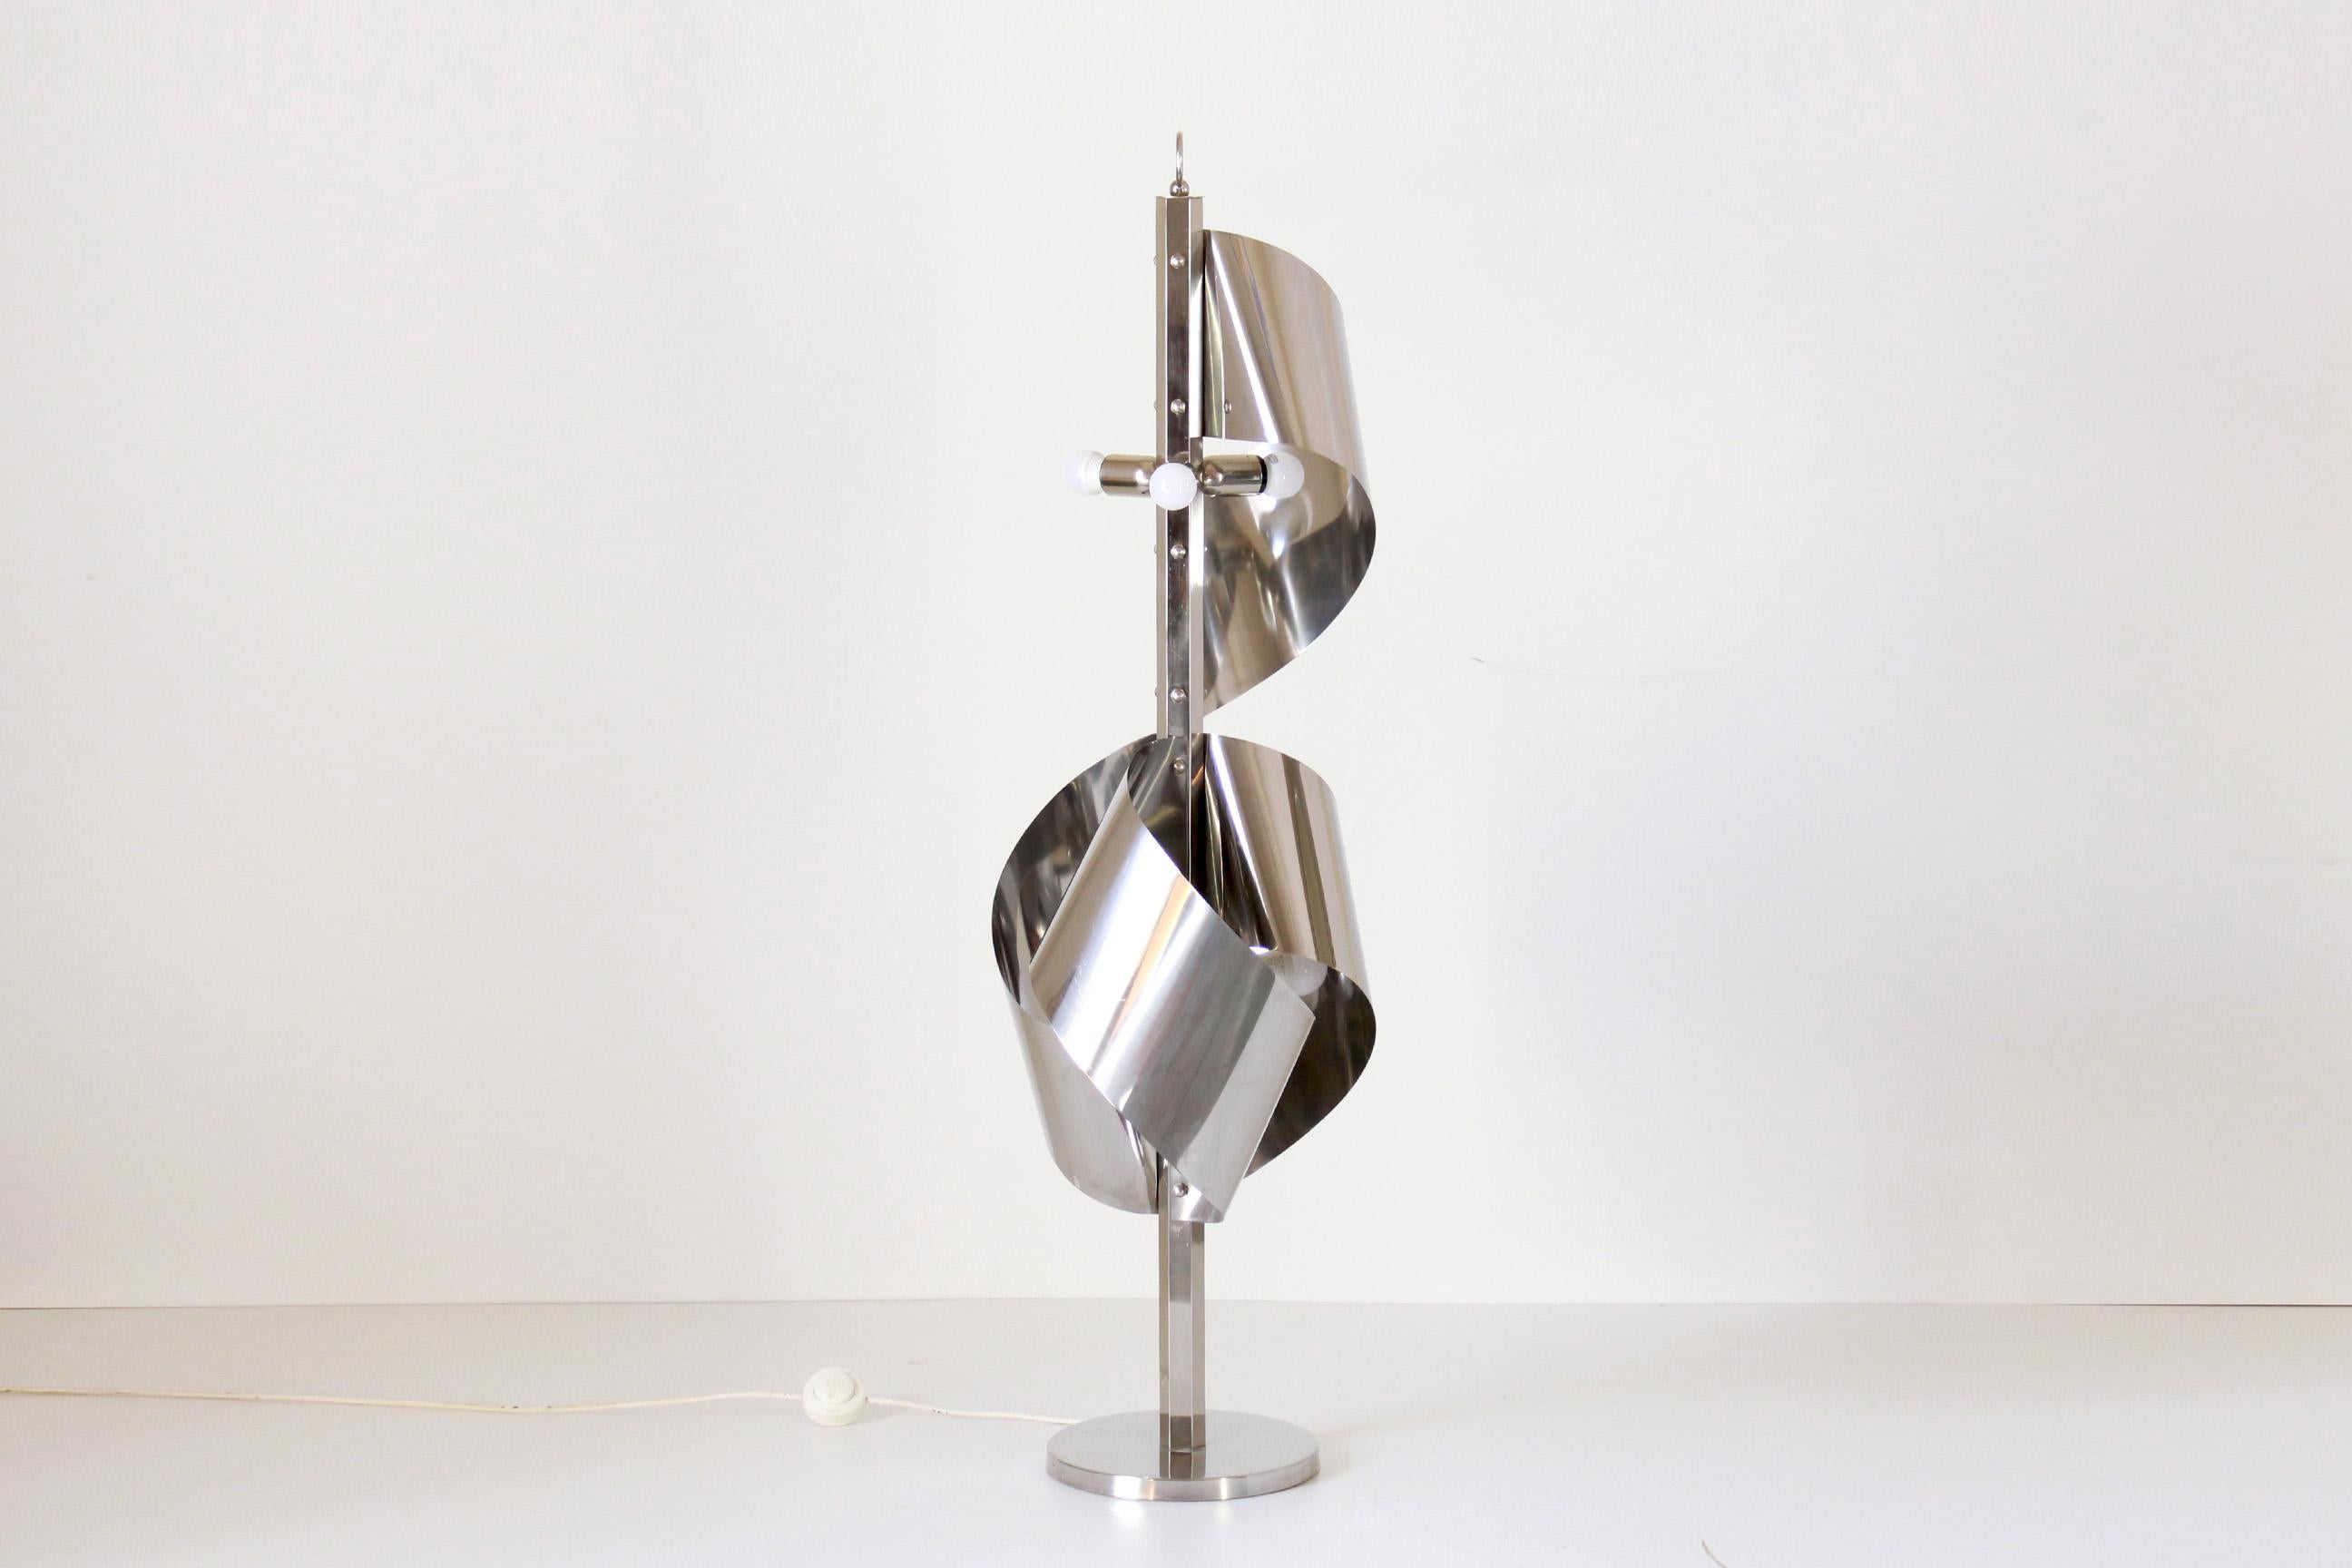 A 1960s vintage floor lamp in chromed iron. Reggiani lamp manufacturer, Italian design lamps form the 1950s-1970s. In very good conditions with only some sign of time on the structure.

